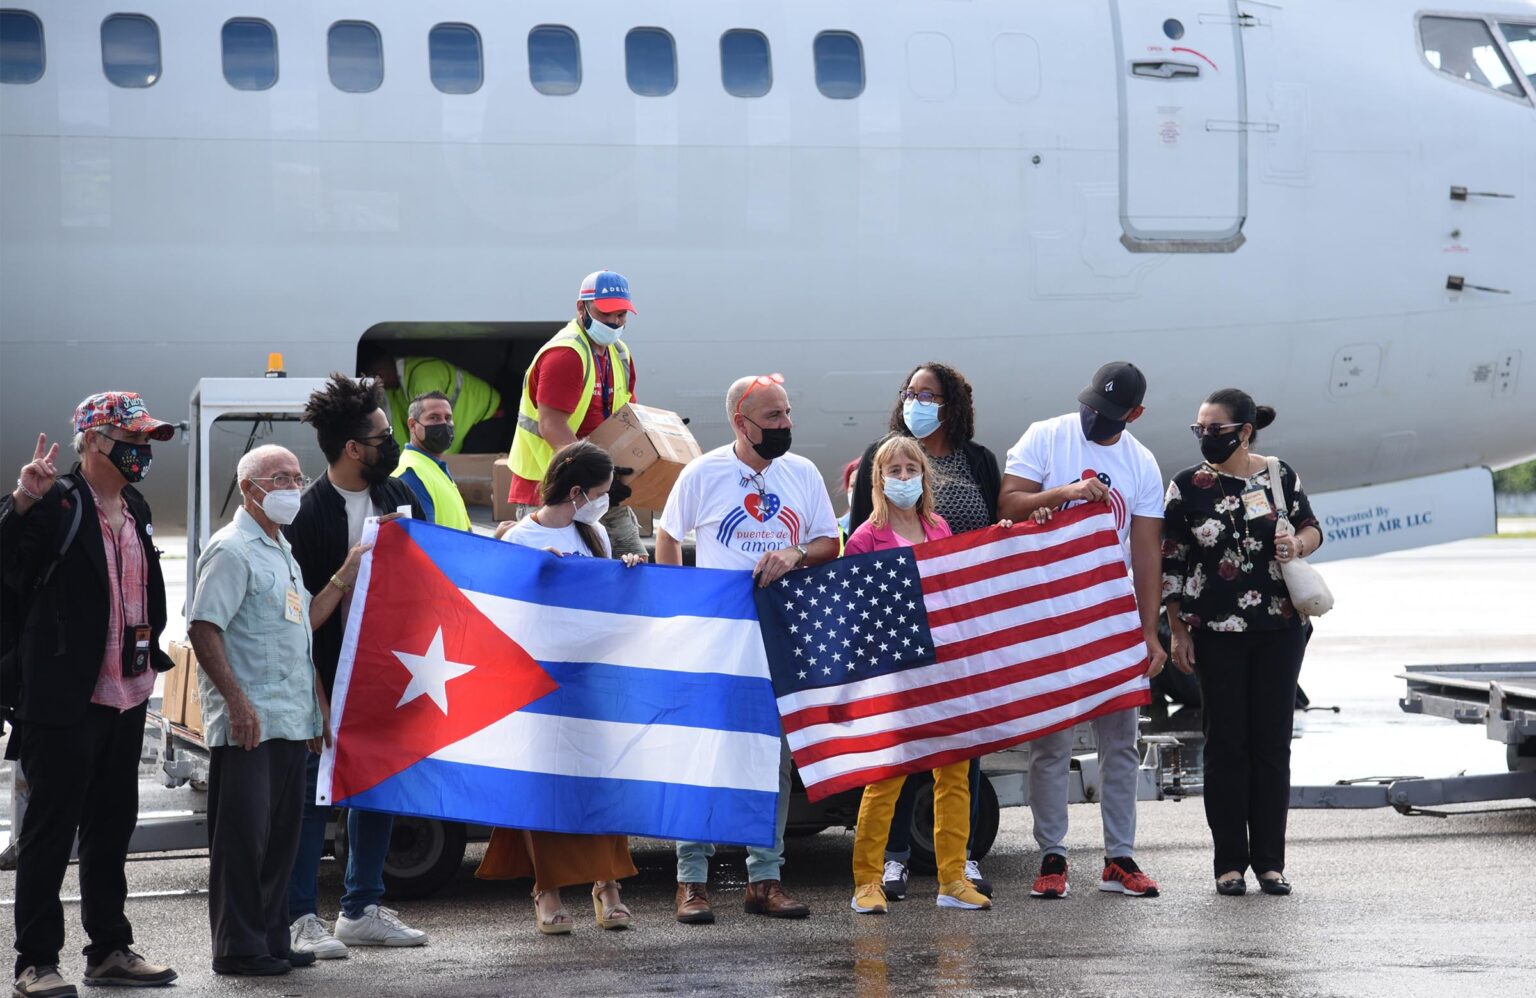 donation-from-us-solidarity-groups-arrives-in-cuba